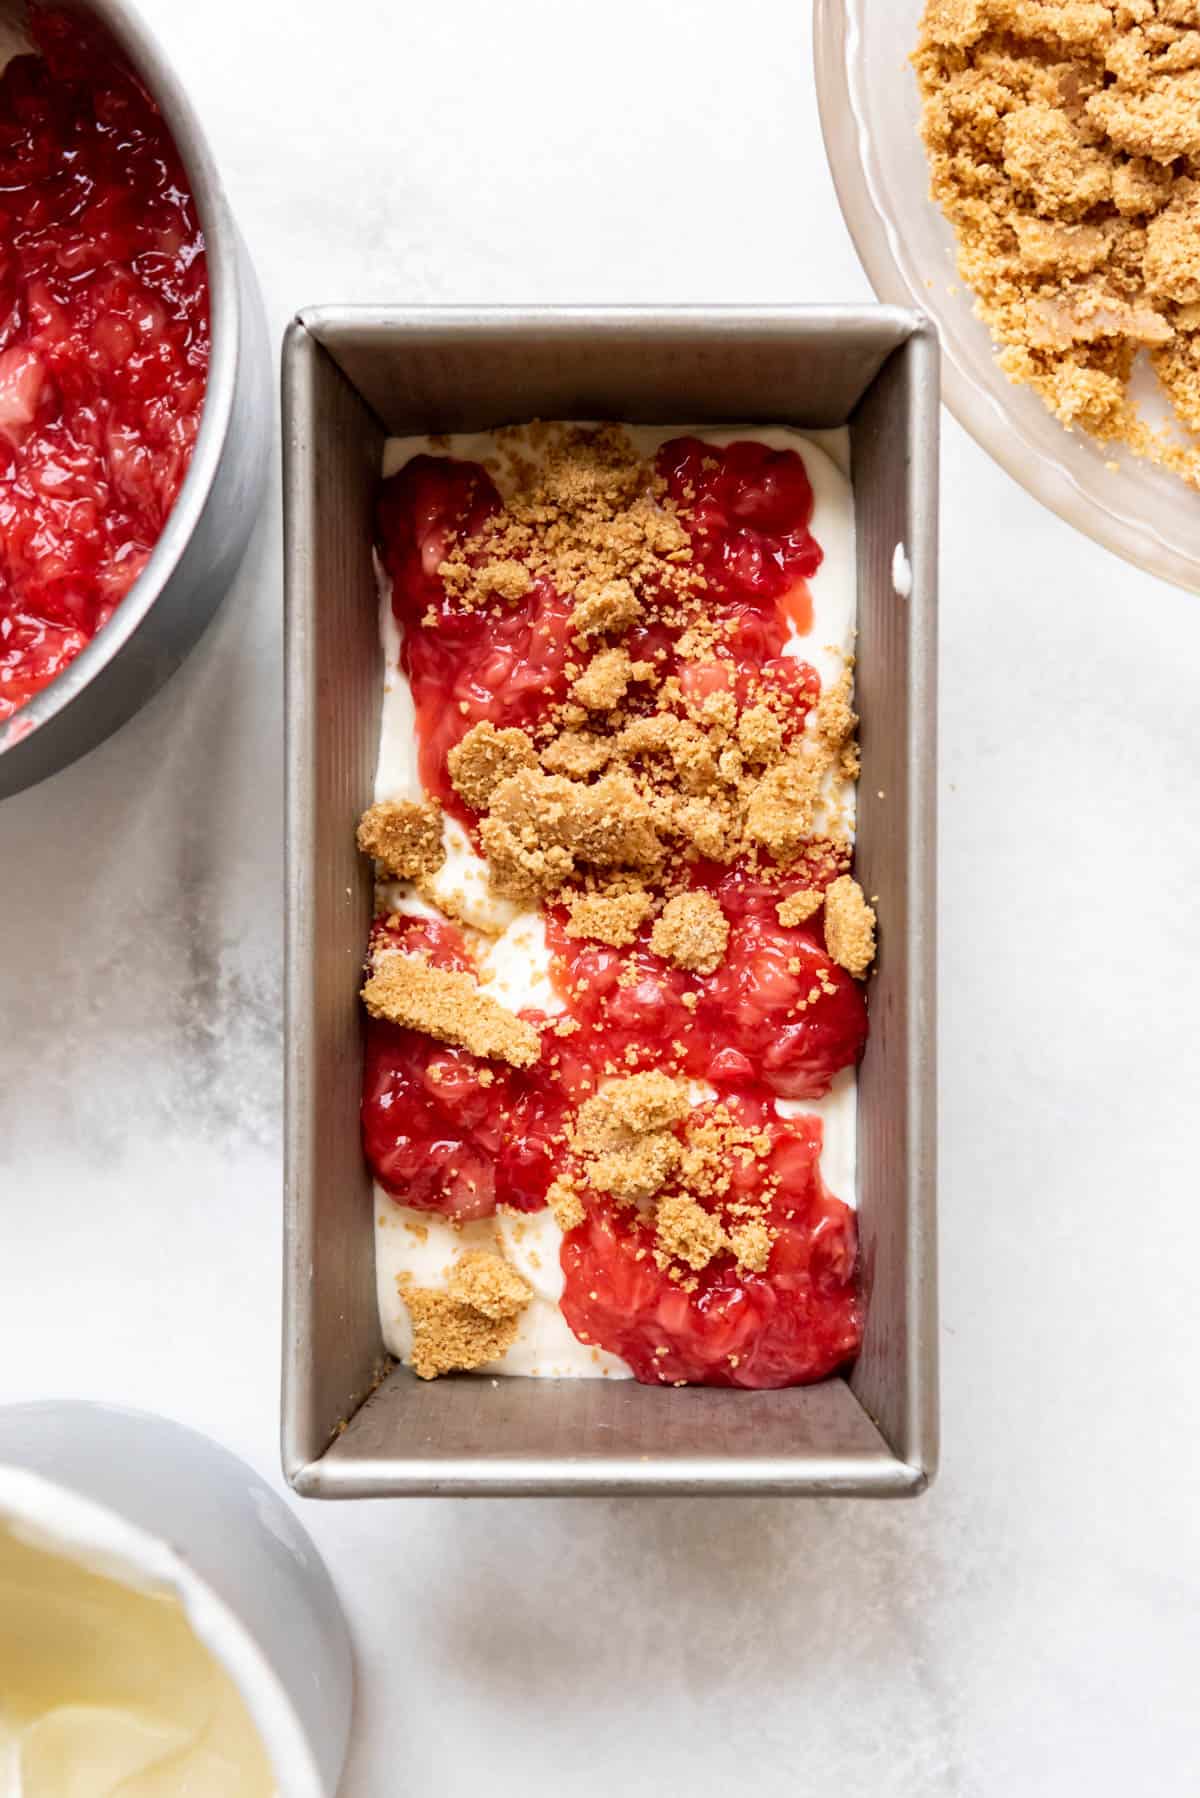 Top view of a metal pan half filled with ice cream, strawberry sauce, and graham cracker crumbs.